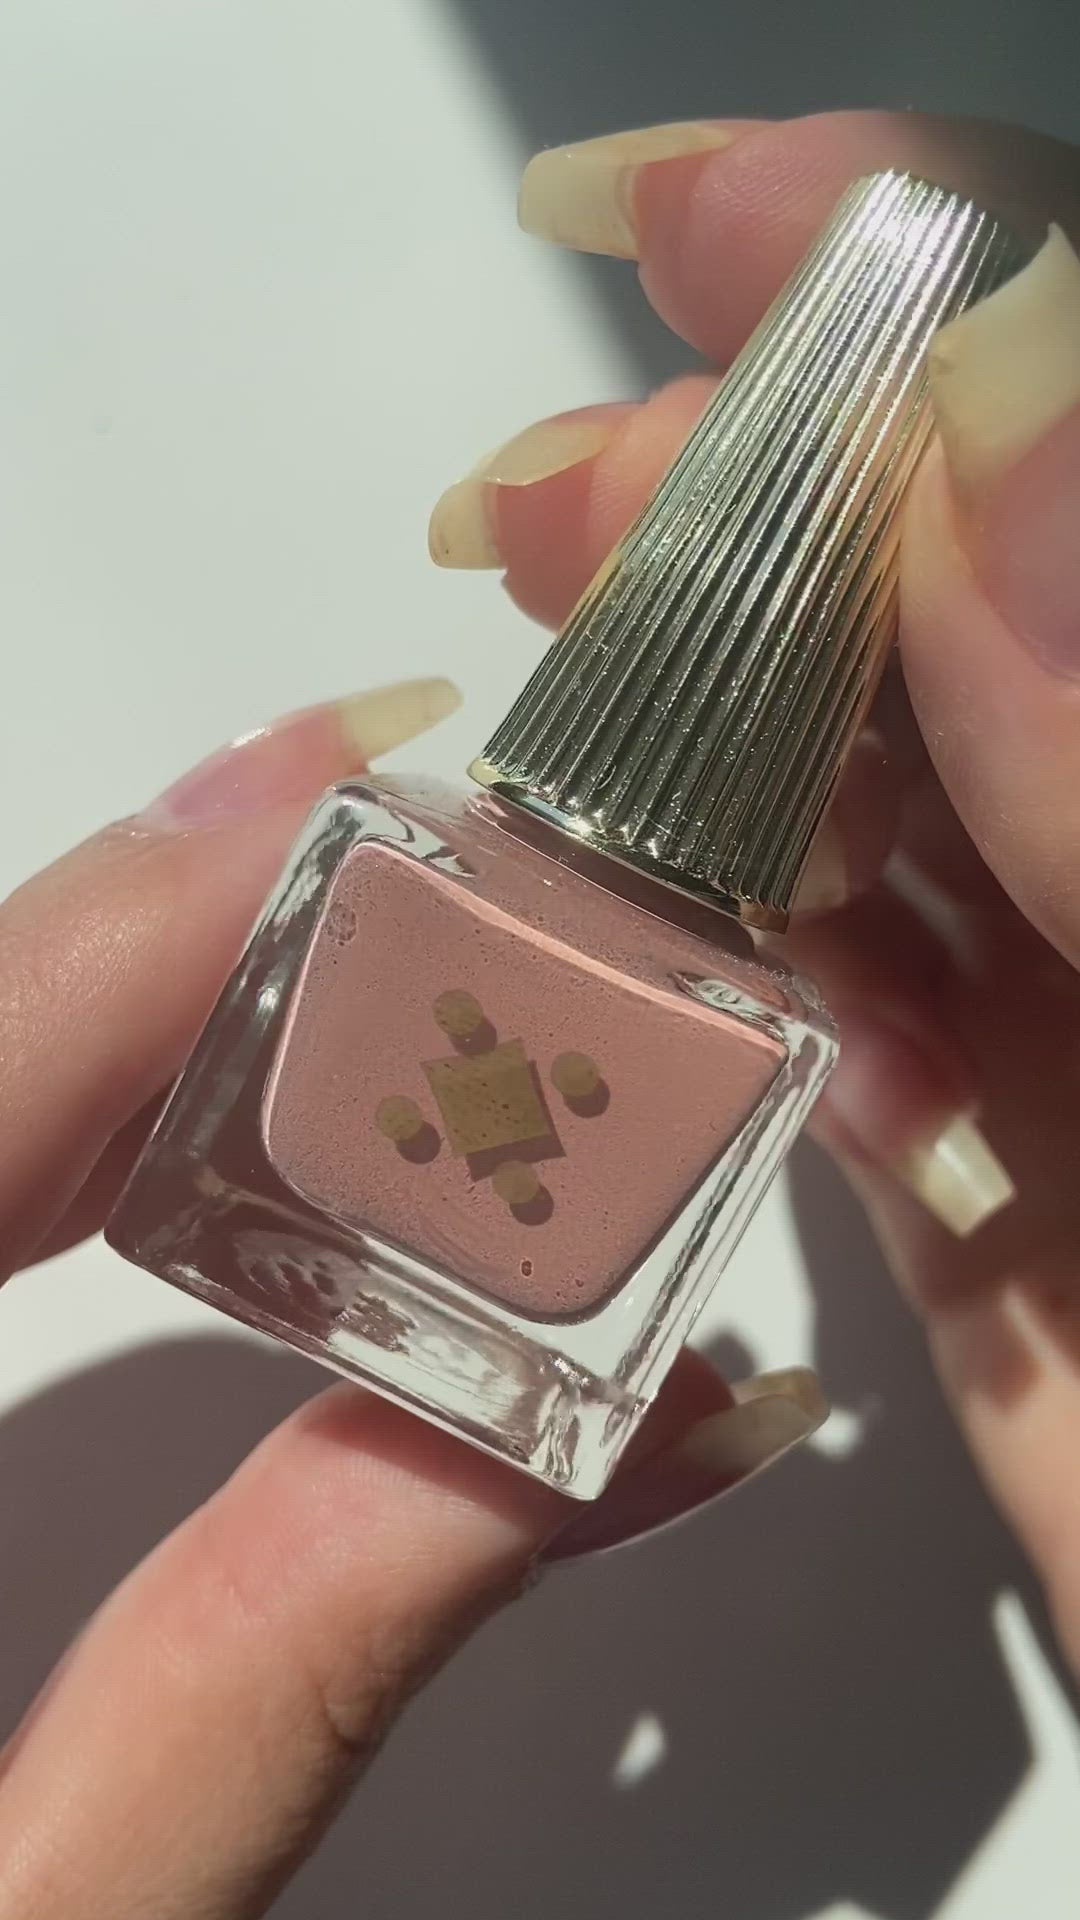 Instafamous pink nude swatch